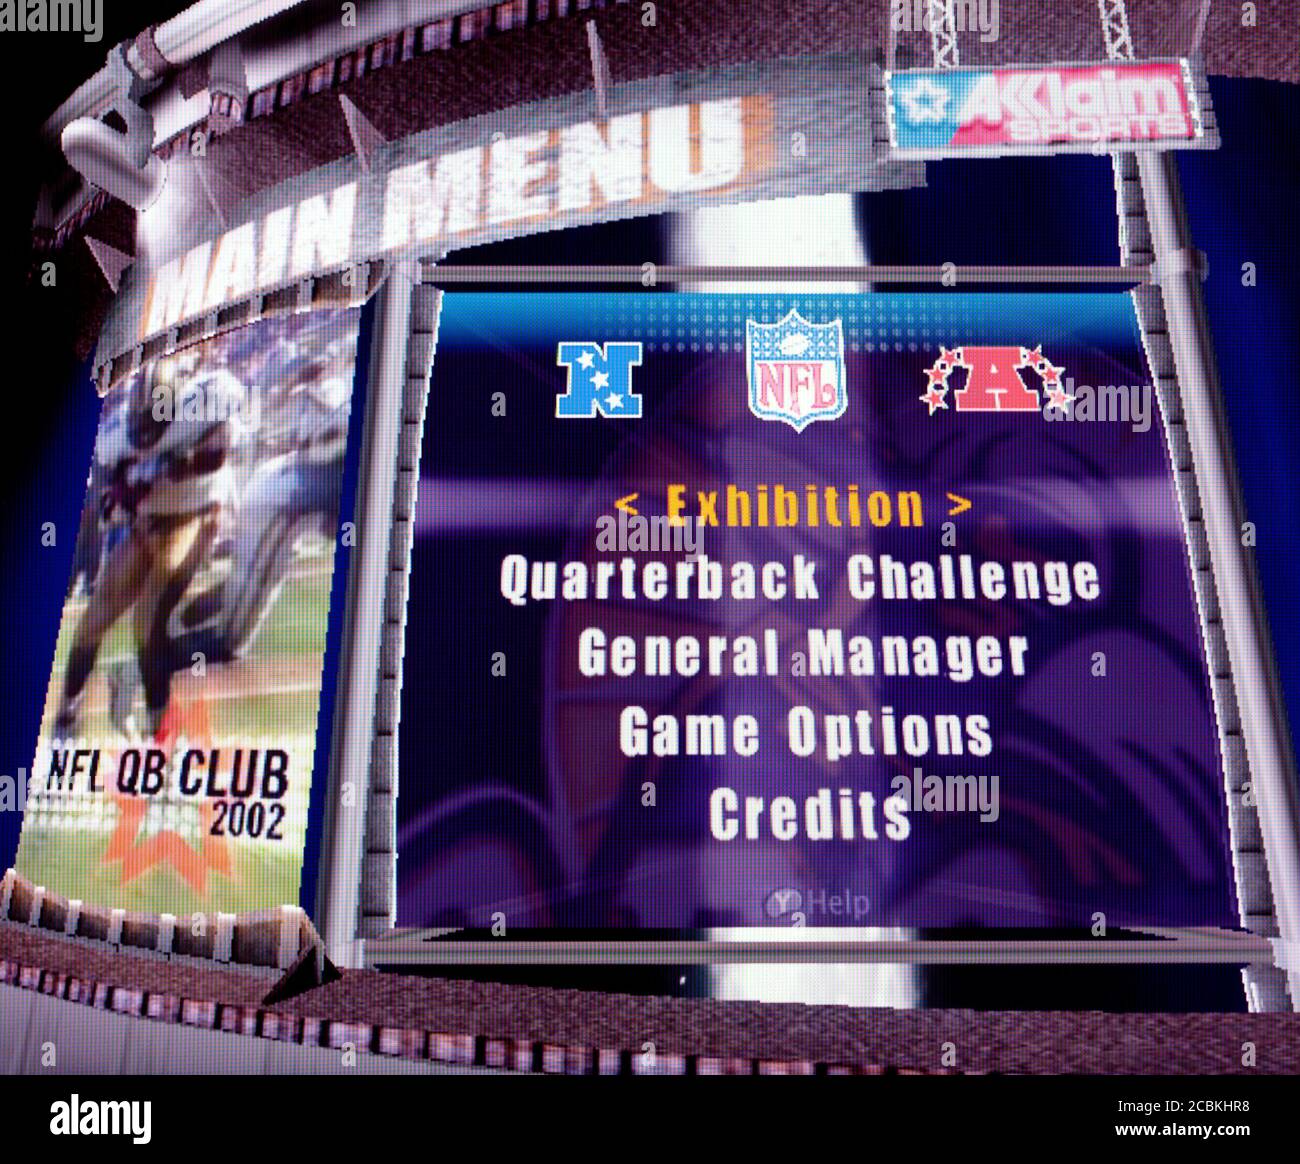 NFL QB Club 2002 - Nintendo Gamecube Videogame - Editorial use only Stock Photo